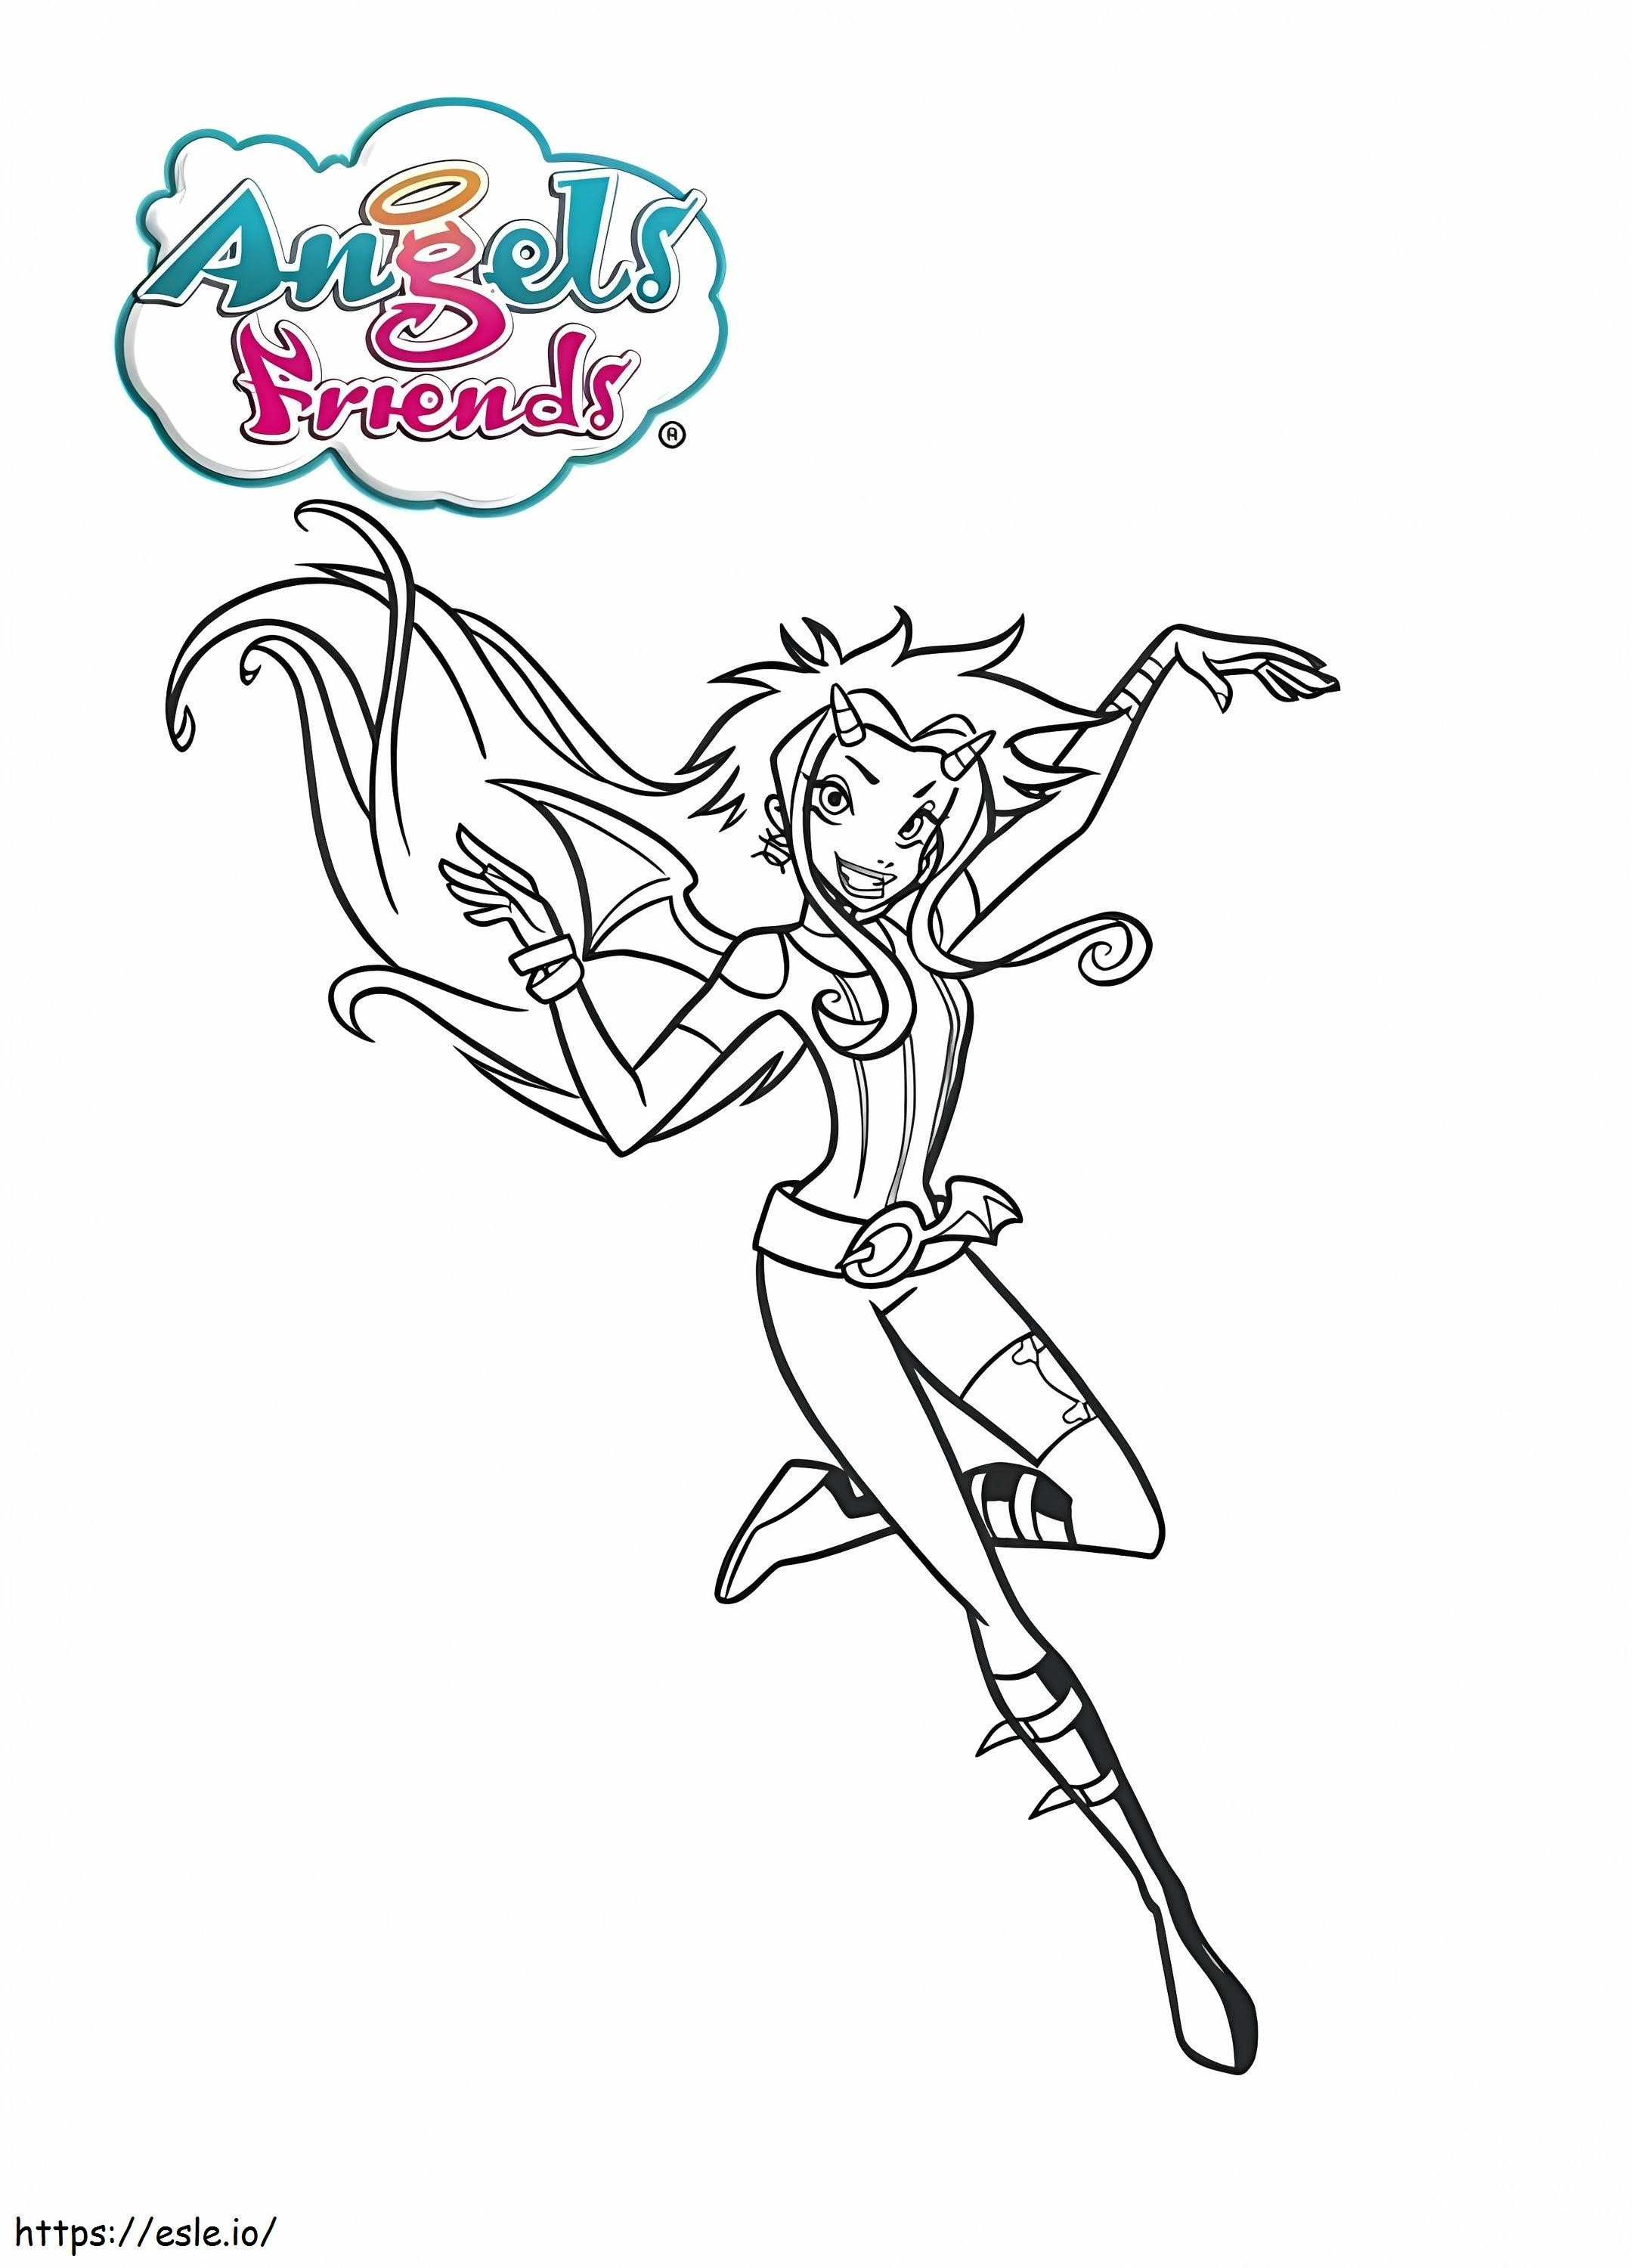 Angels Friends 3 coloring page